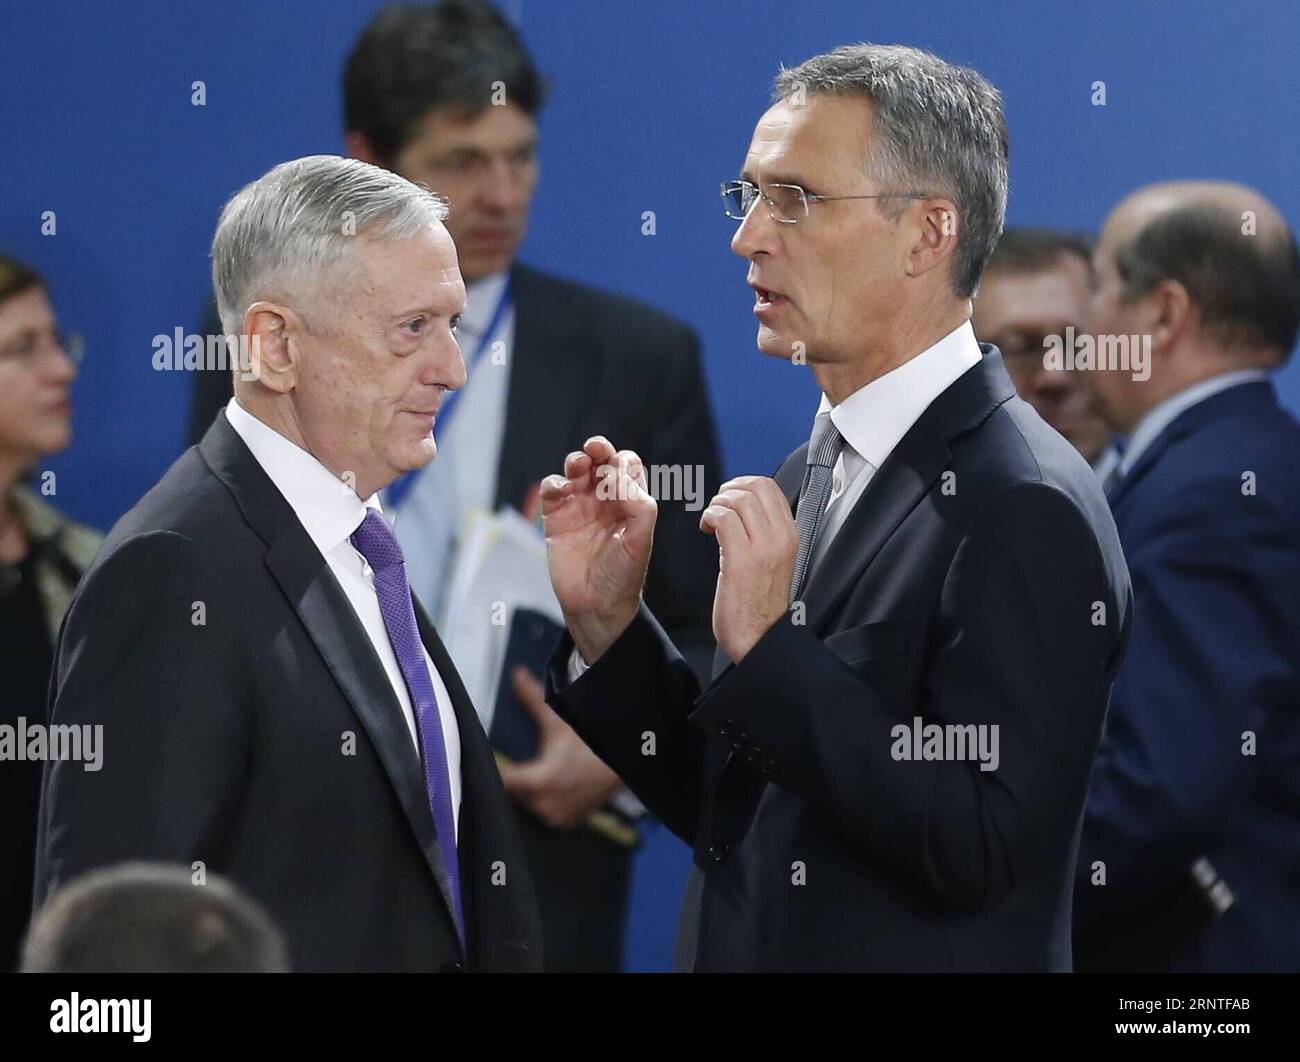 (171108) -- BRUSSELS, Nov. 8, 2017 -- US Secretary of Defense Jim Mattis (L) and NATO Secretary General Jens Stoltenberg talk prior to the first day of a two-days NATO Defense Ministers meeting at its headquarters in Brussels, Belgium, on Nov. 8, 2017.)(axy) BELGIUM-BRUSSELS-NATO-DEFENSE MINISTER-MEETING YexPingfan PUBLICATIONxNOTxINxCHN Stock Photo